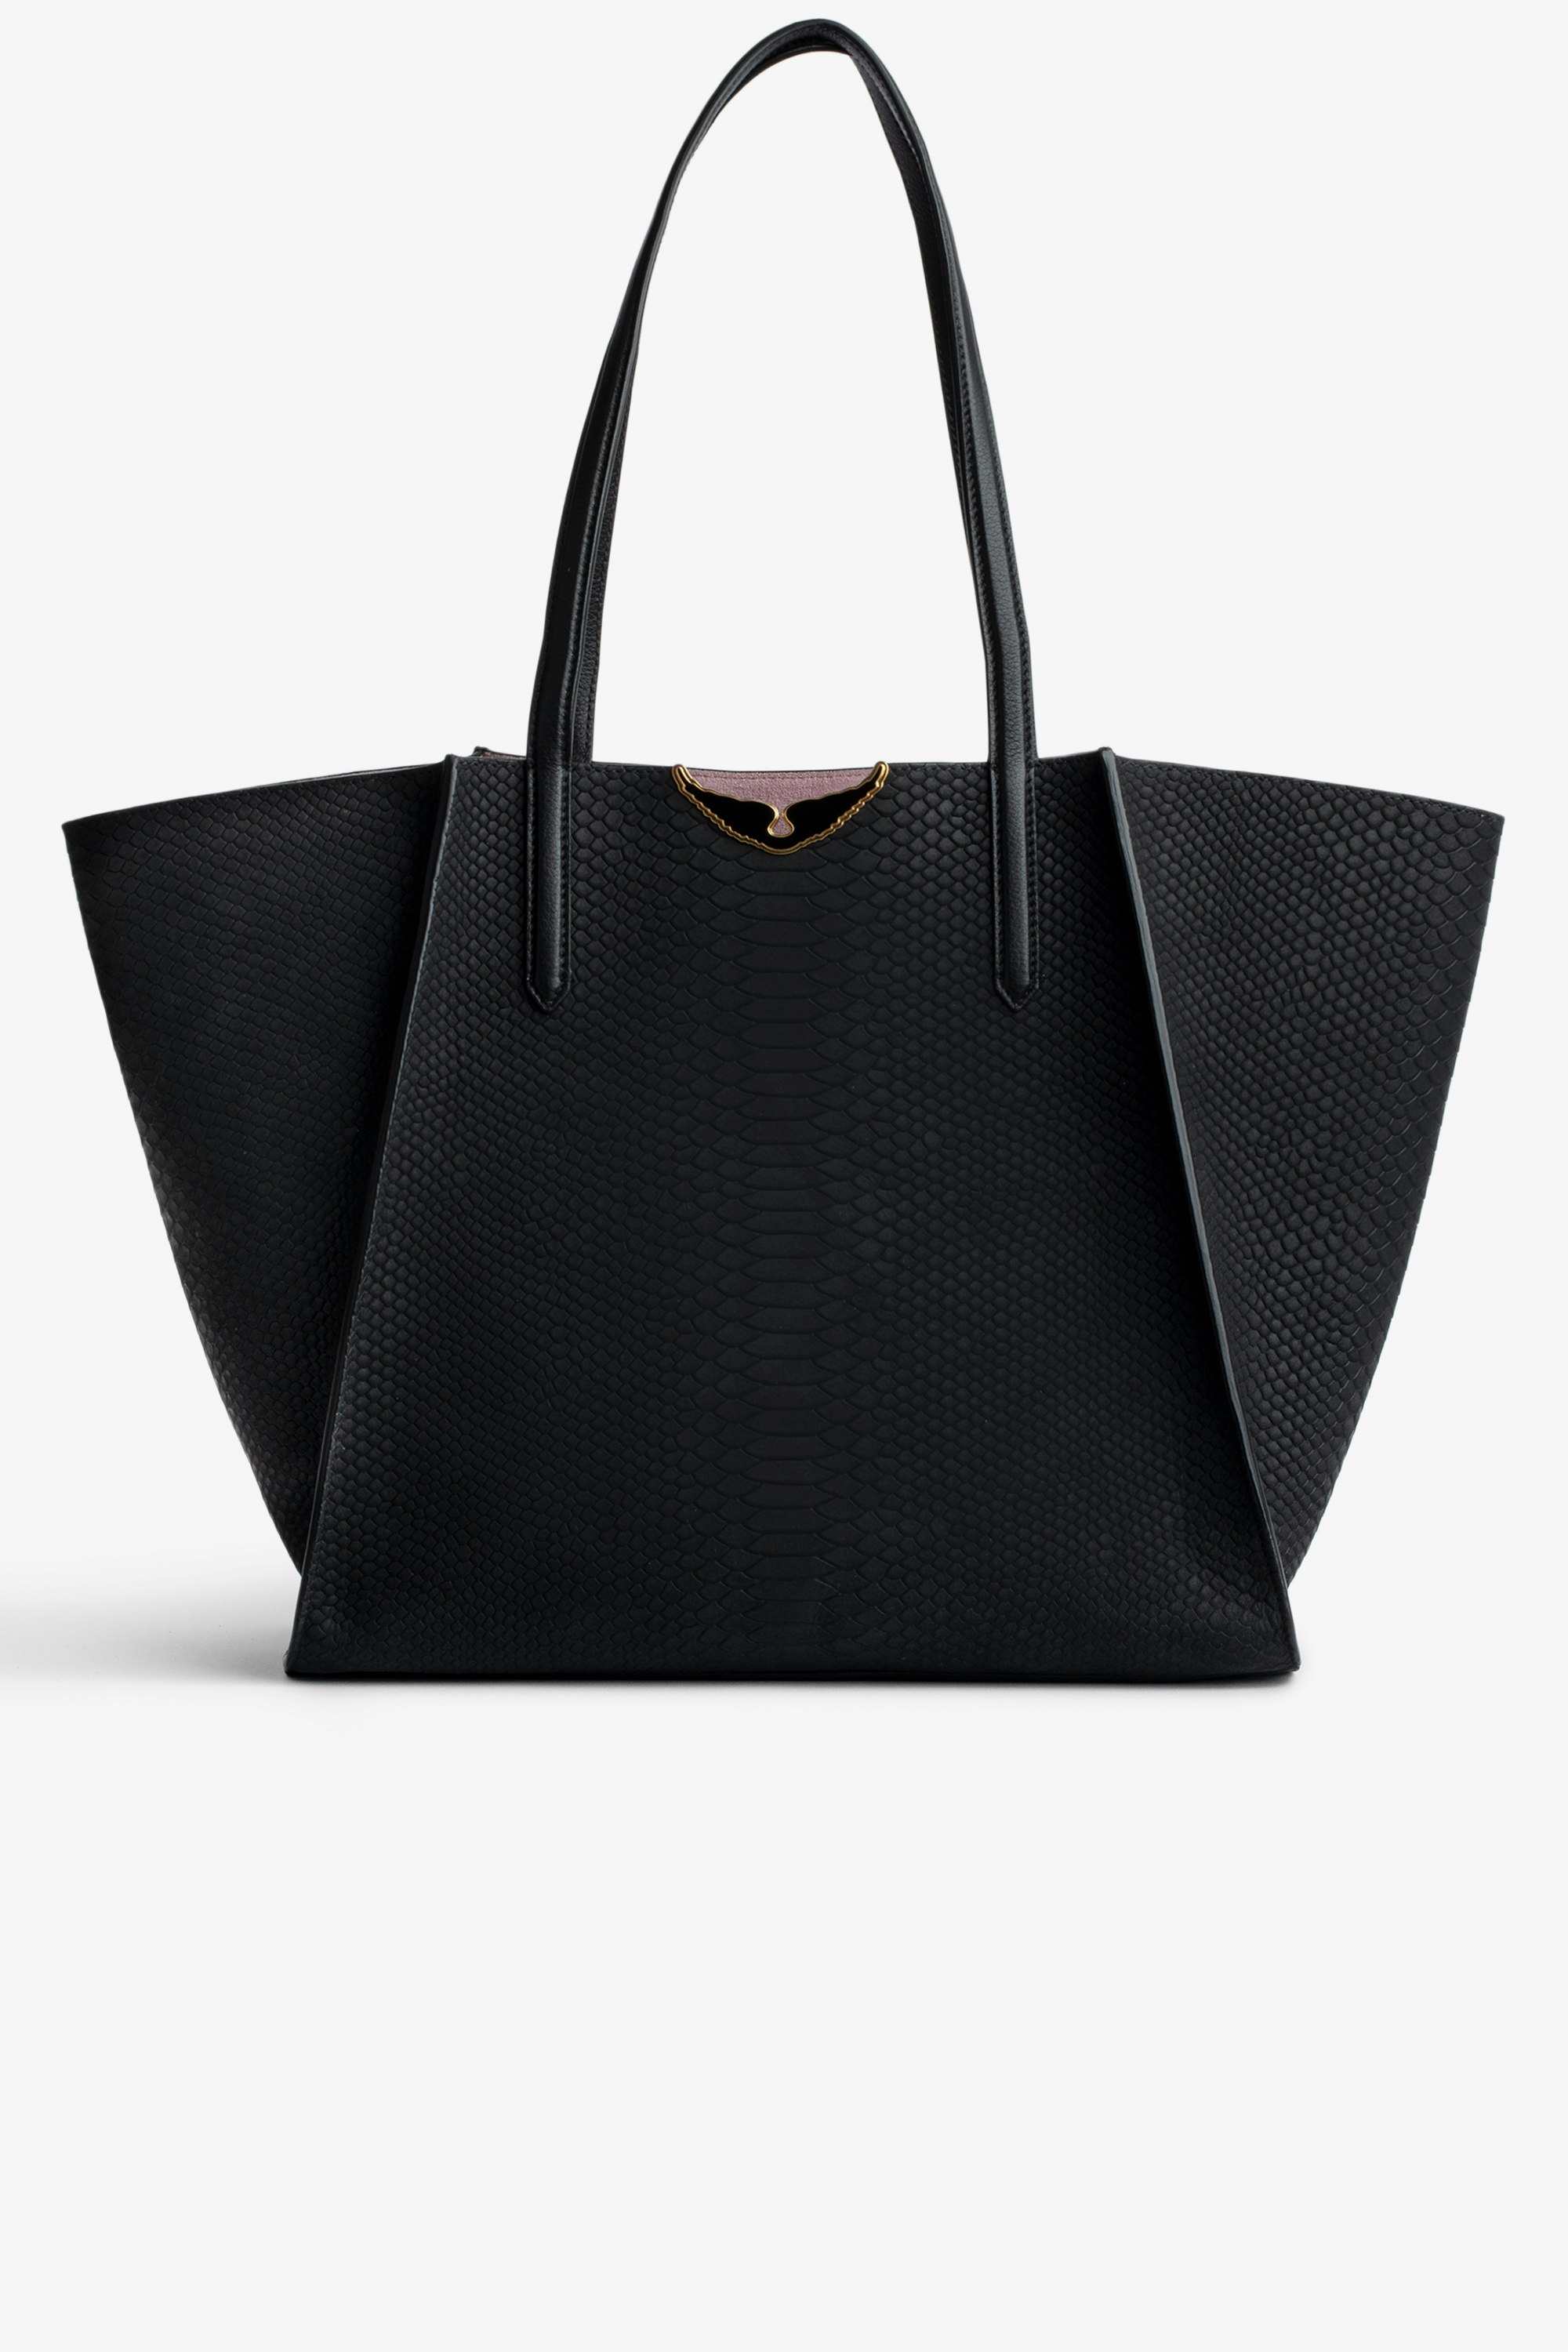 Le Borderline Soft Savage Bag Women's reversible tote bag in black python-effect leather and pink suede with black lacquered wings